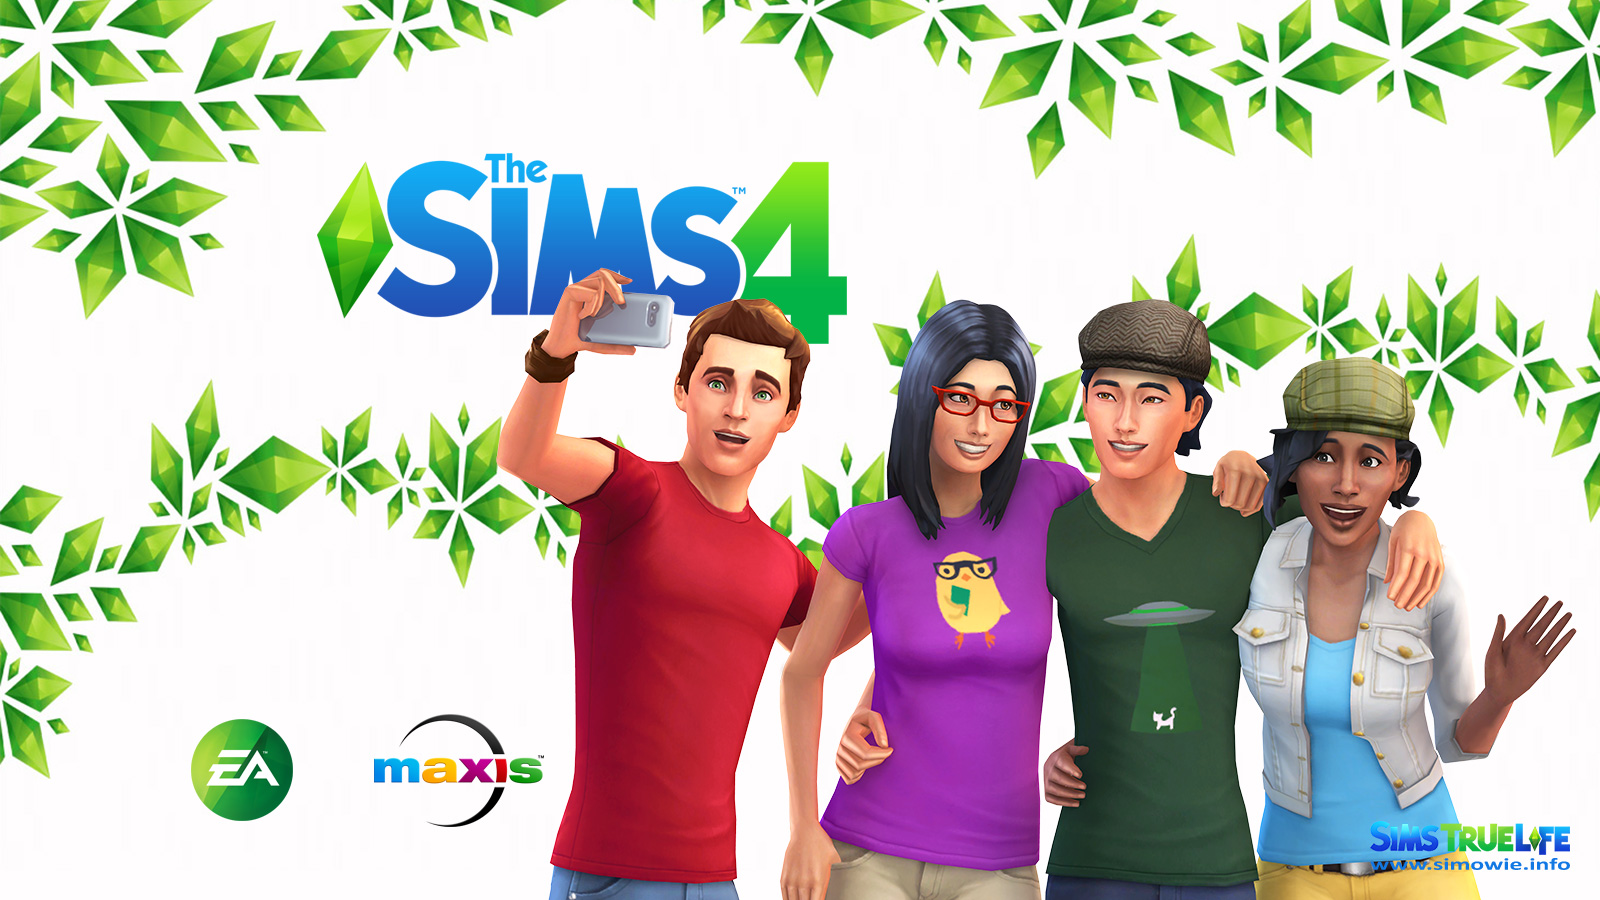 Sims 4 Pc Download Torrent